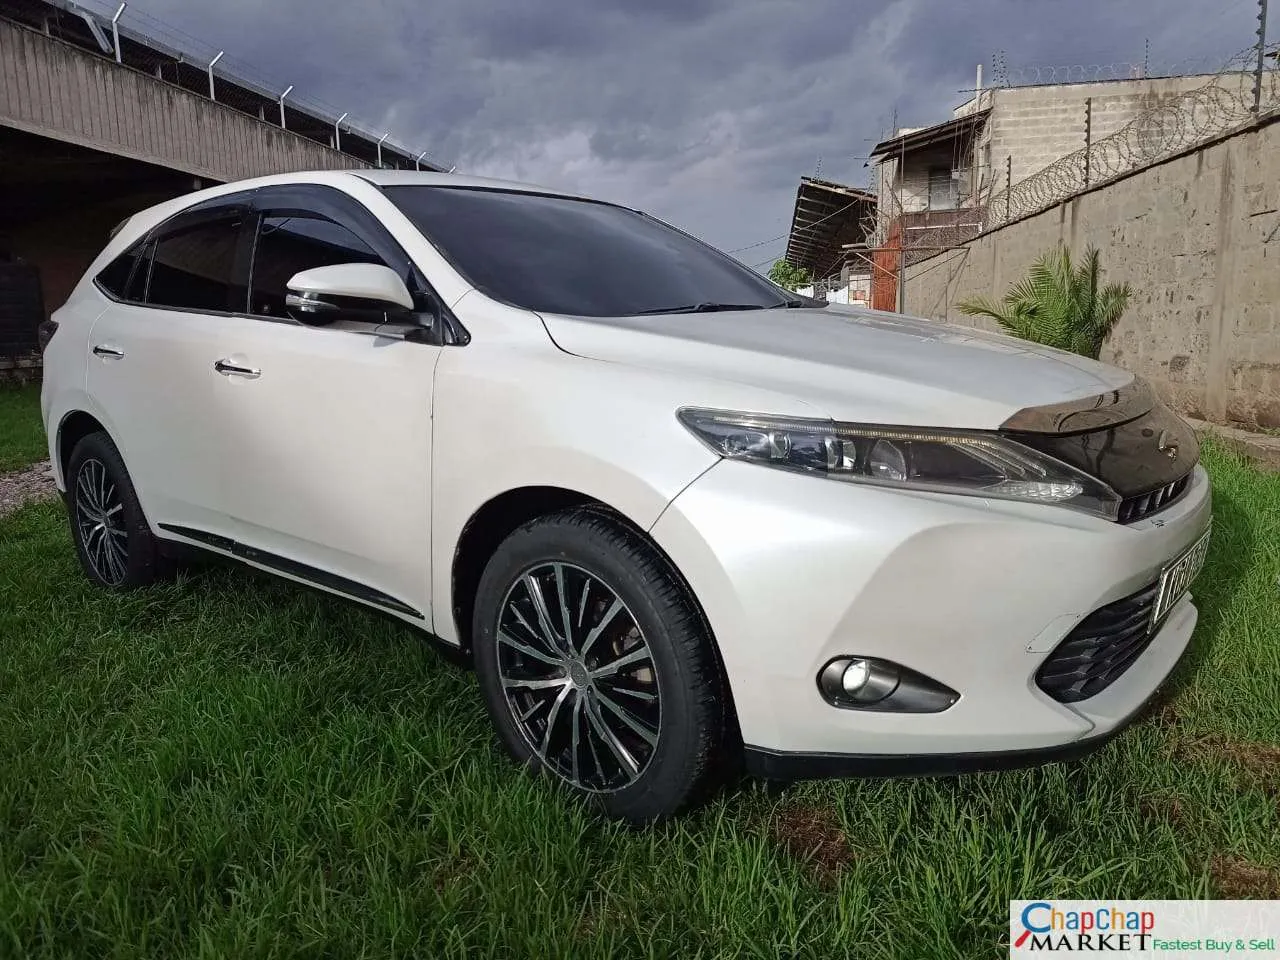 Cars Cars For Sale/Vehicles-Toyota Harrier NEW SHAPE QUICK SALE 2.45M You Pay 30% Deposit Trade in OK EXCLUSIVE 8